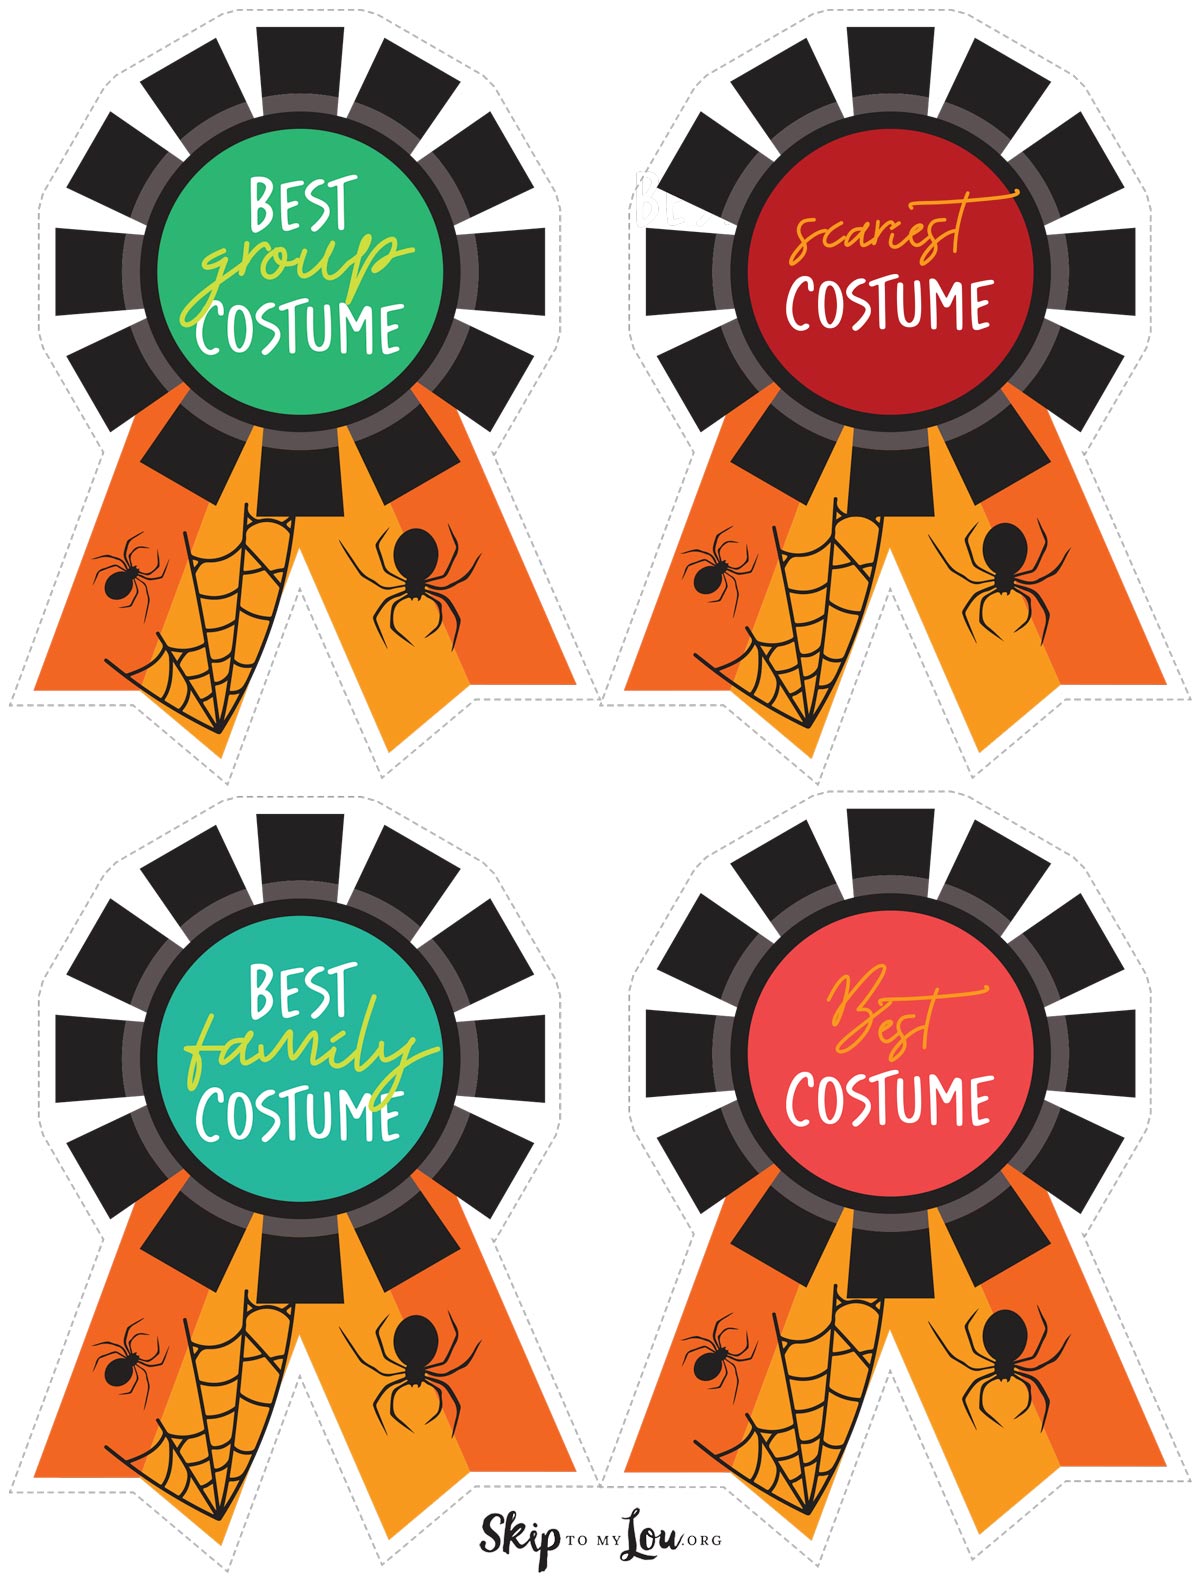 halloween badge awards for costume party: Best Group Costume Scariest Costume Best Family Costume Best Costume 